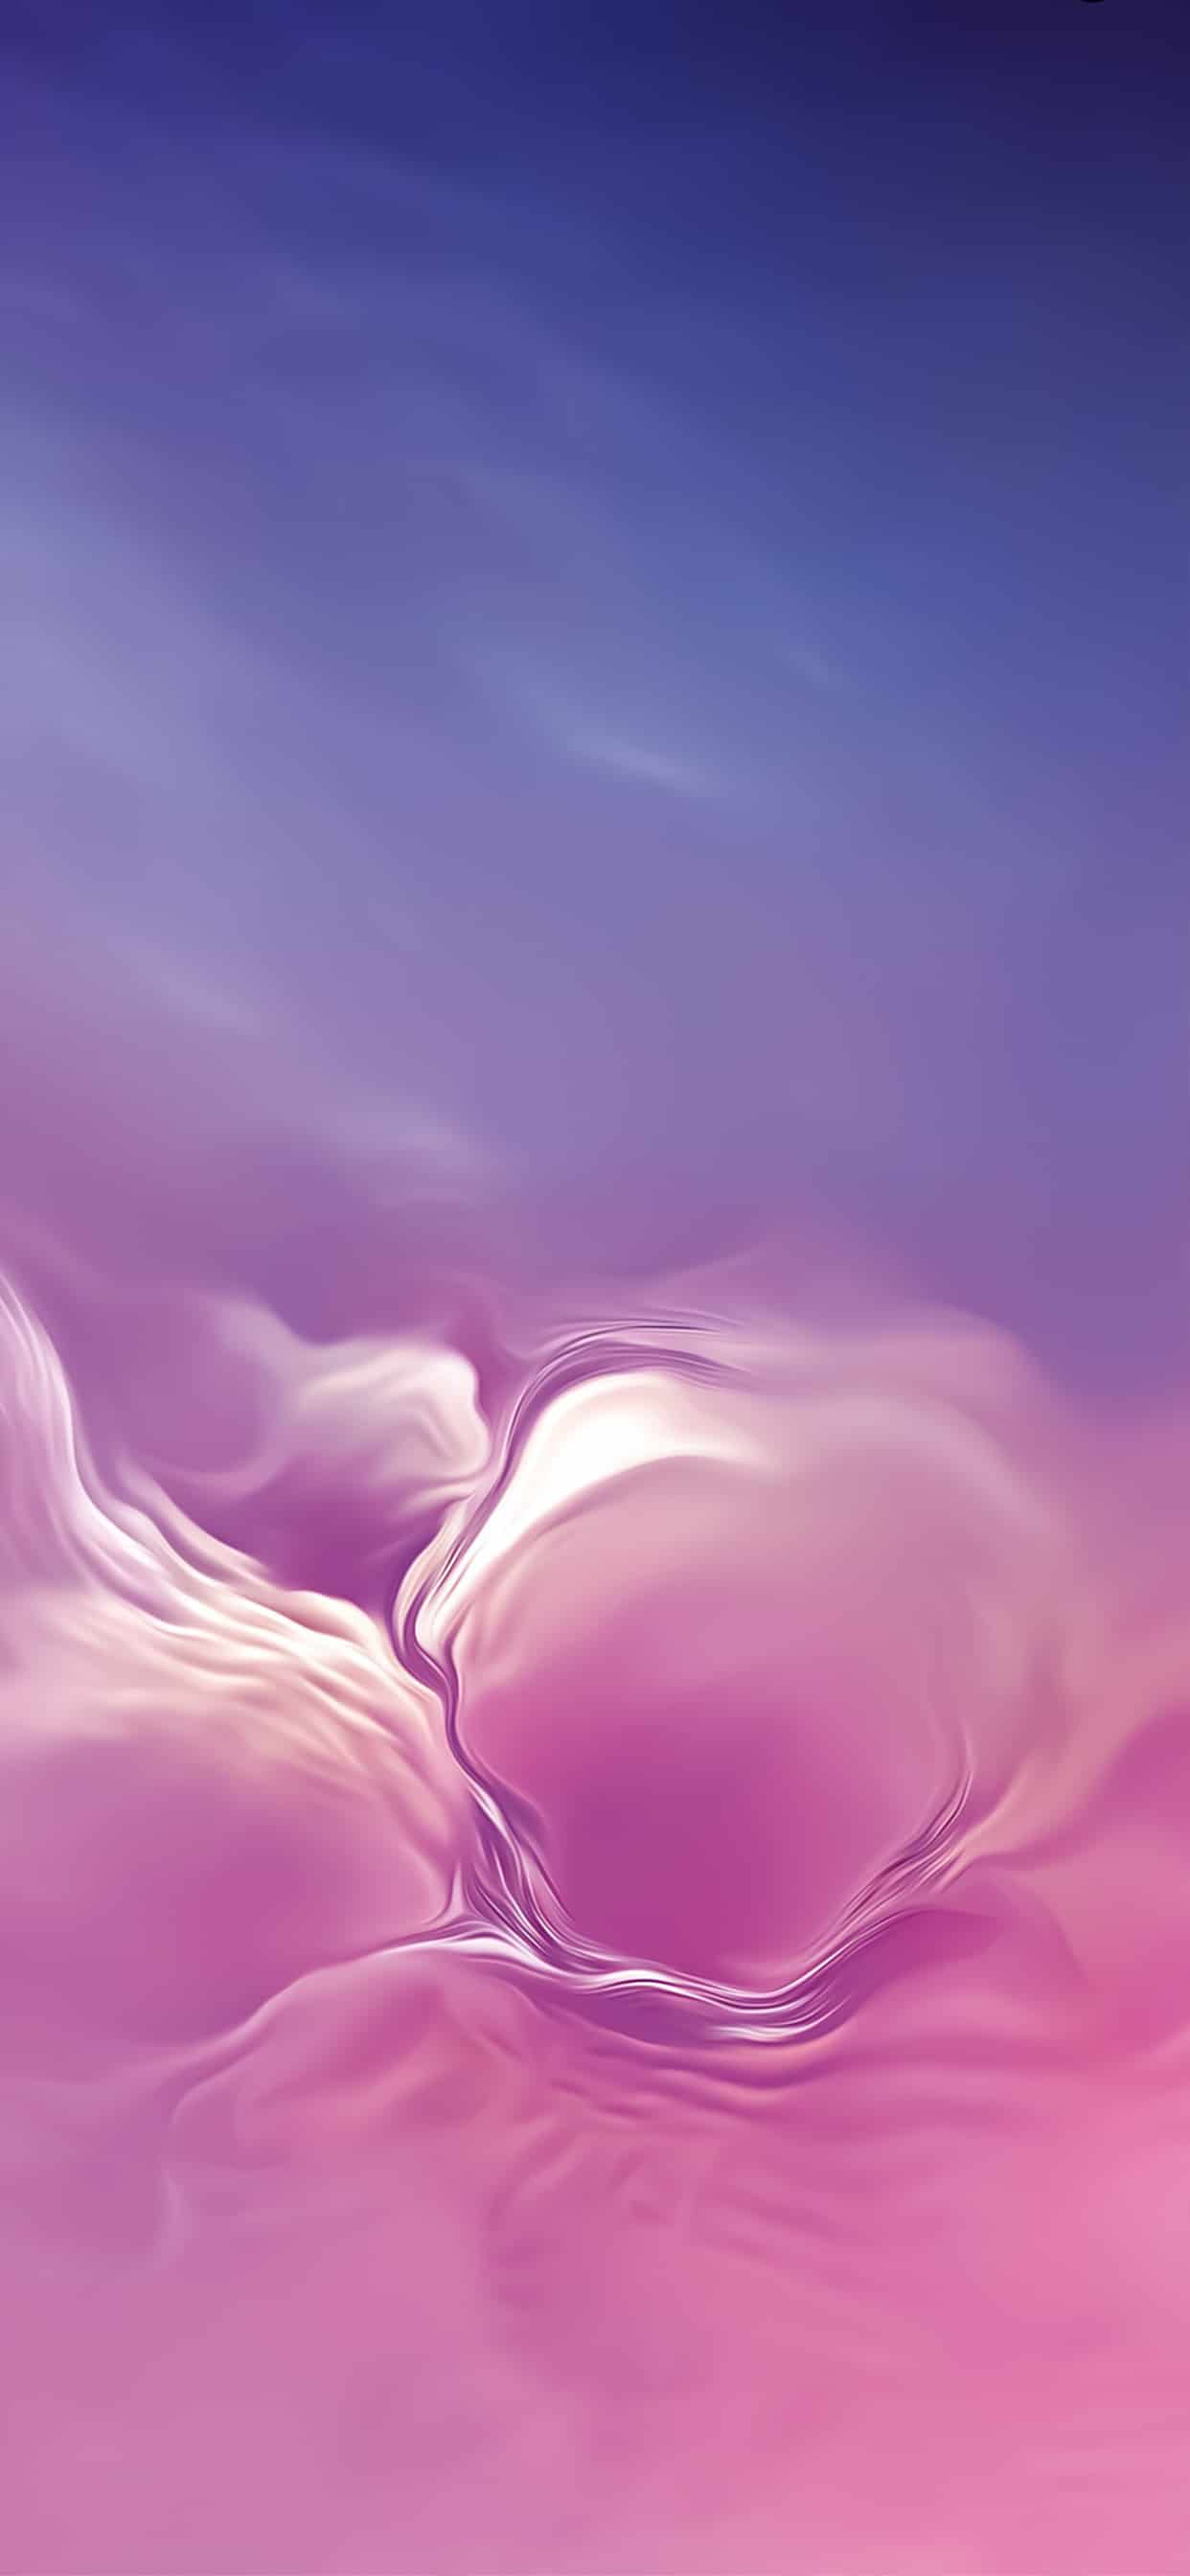 Samsung Galaxy S10 Wallpapers Download (29 Official QHD+ Walls)